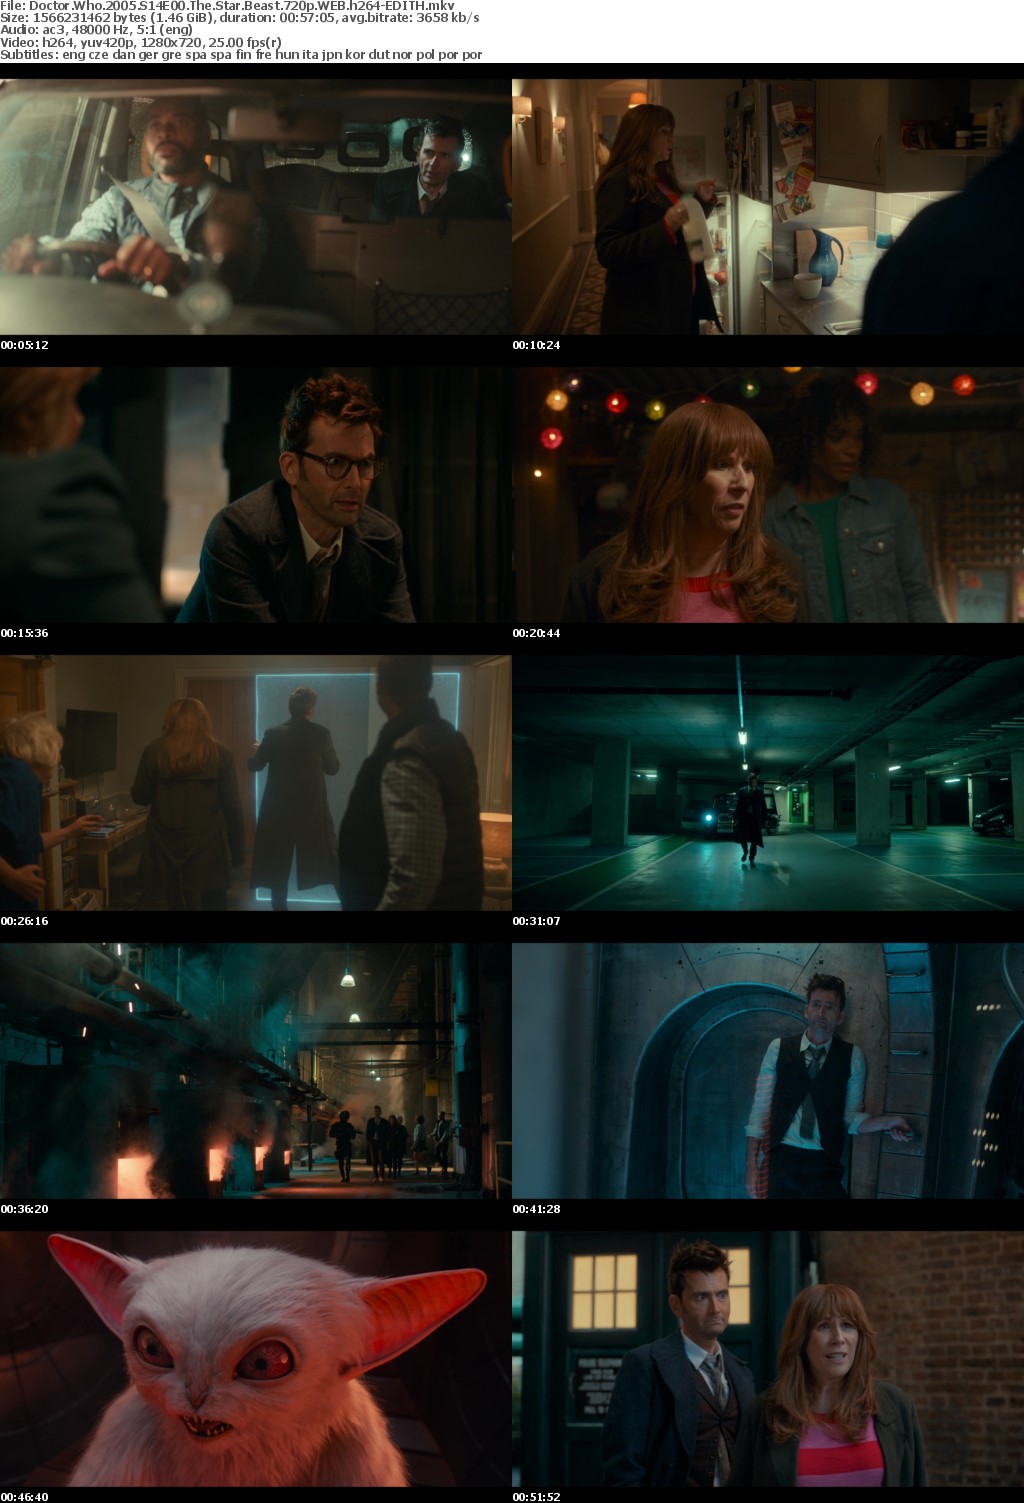 Doctor Who 2005 S14E00 The Star Beast 720p WEB h264-EDITH